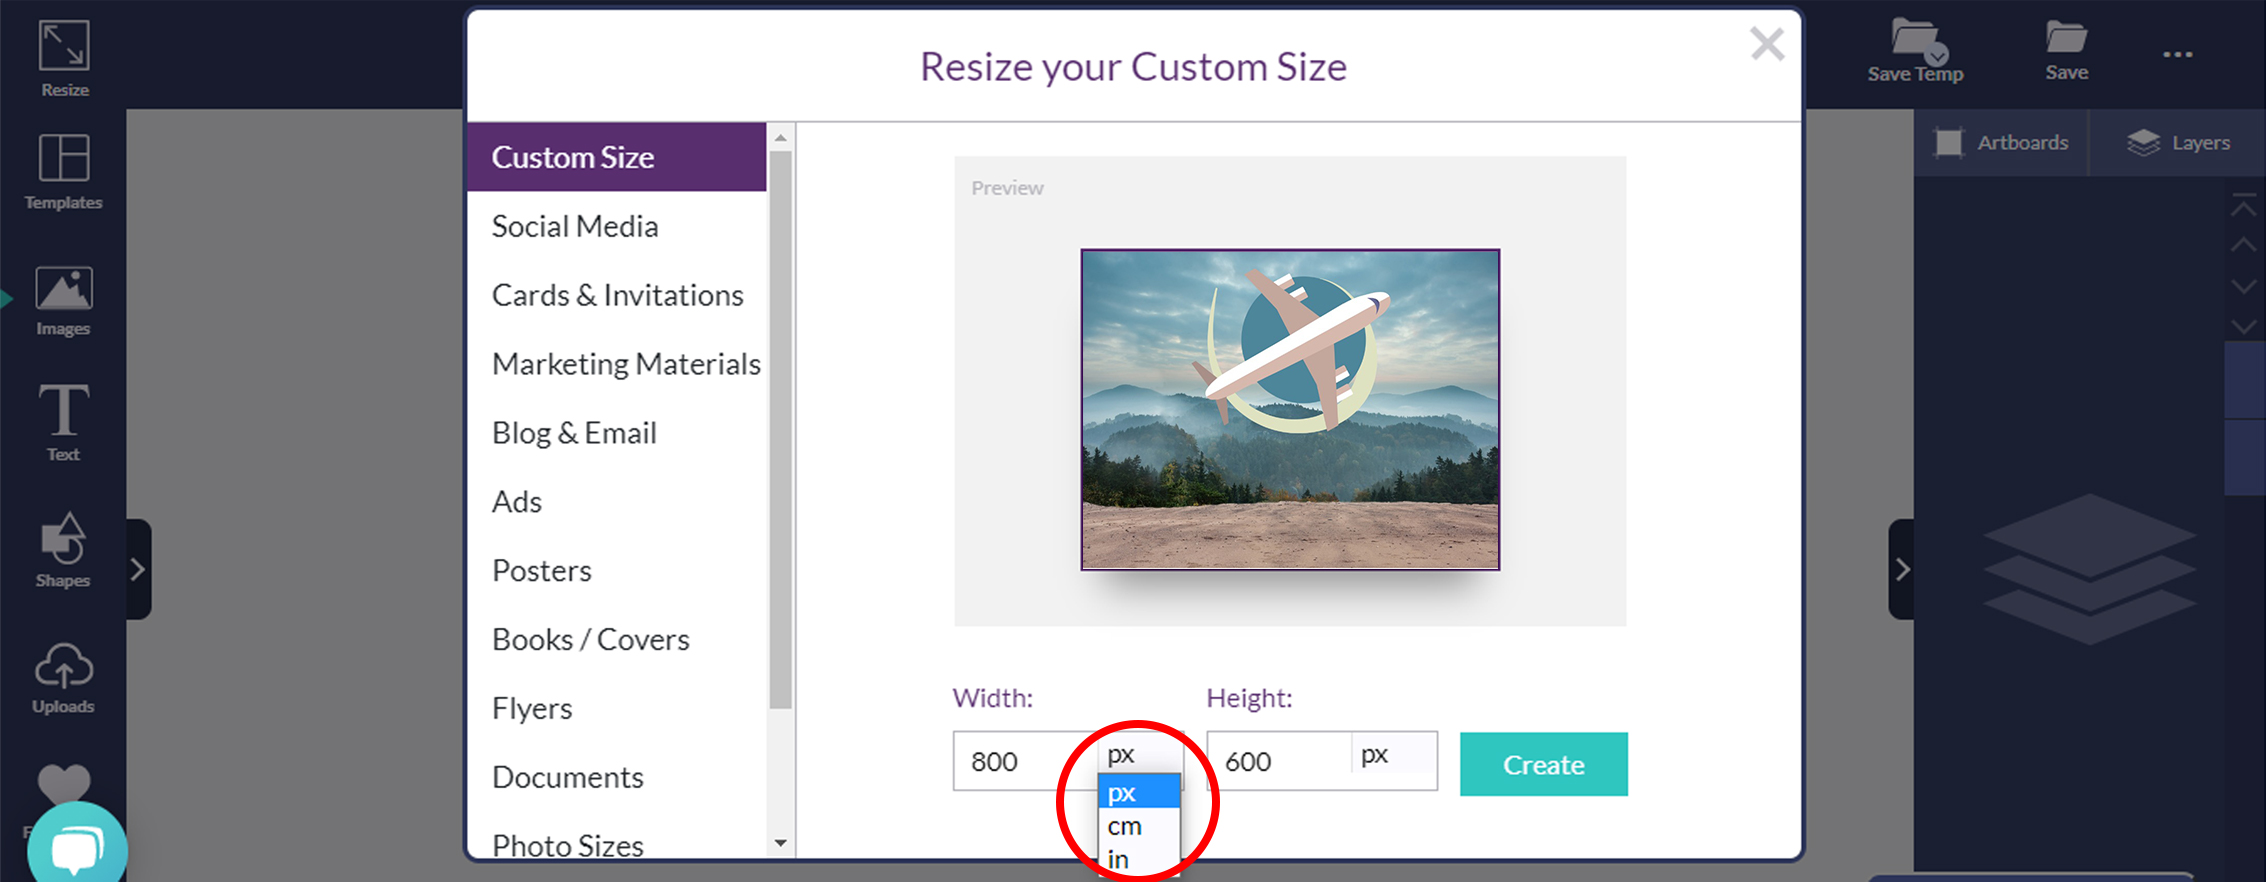 Design Wizard resizing tool being used to change dimensions of image - Why do you need to understand the conversion of inches to pixels when resizing images, and what free online tools can help with it - Image